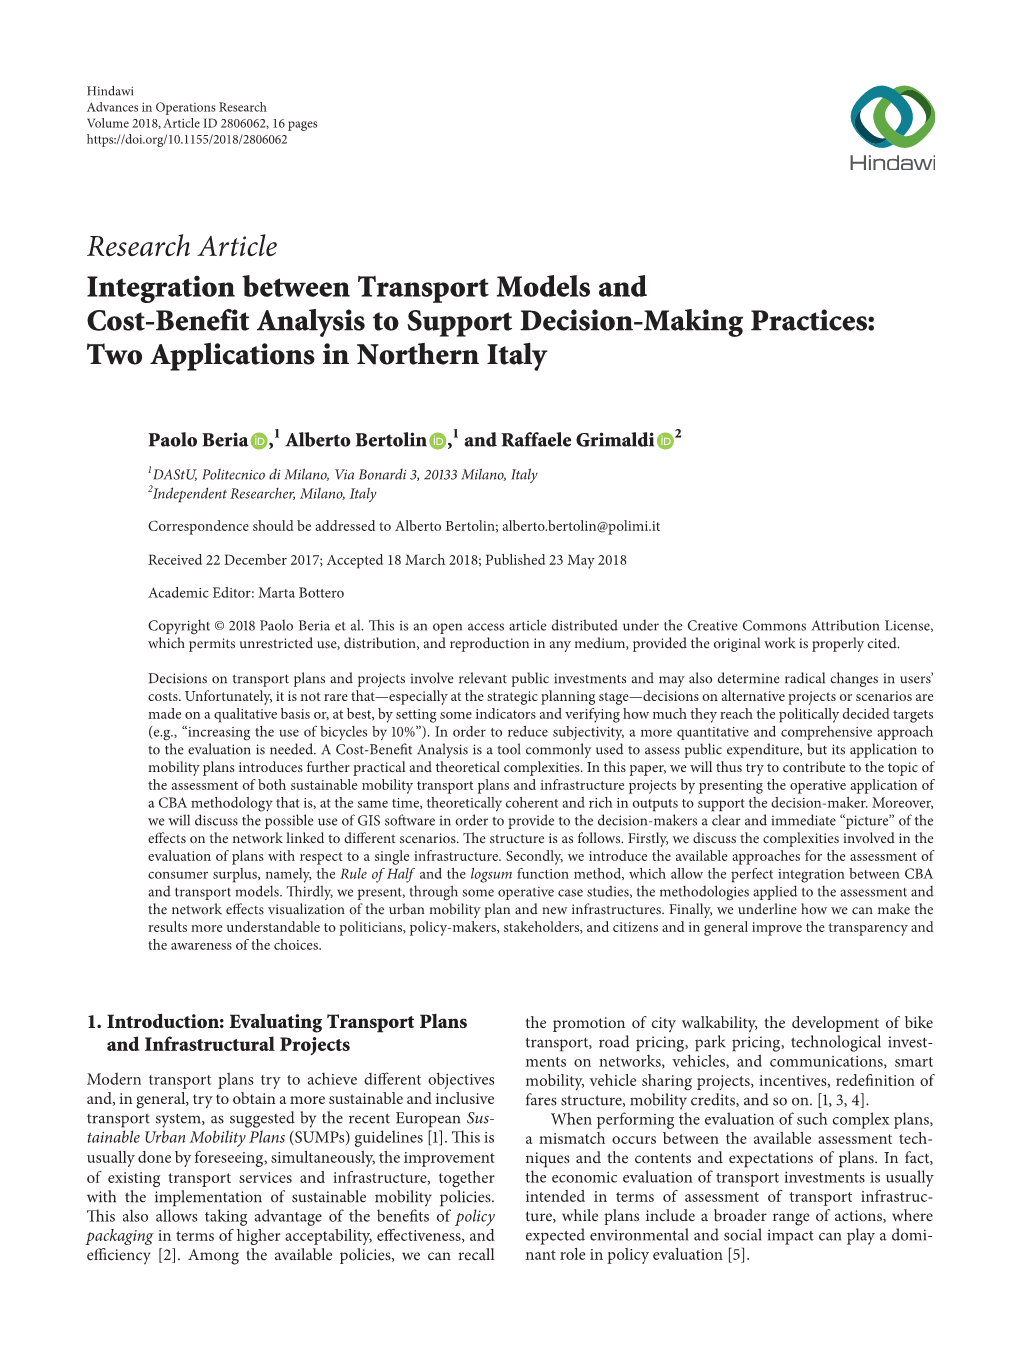 Research Article Integration Between Transport Models and Cost-Benefit Analysis to Support Decision-Making Practices: Two Applications in Northern Italy